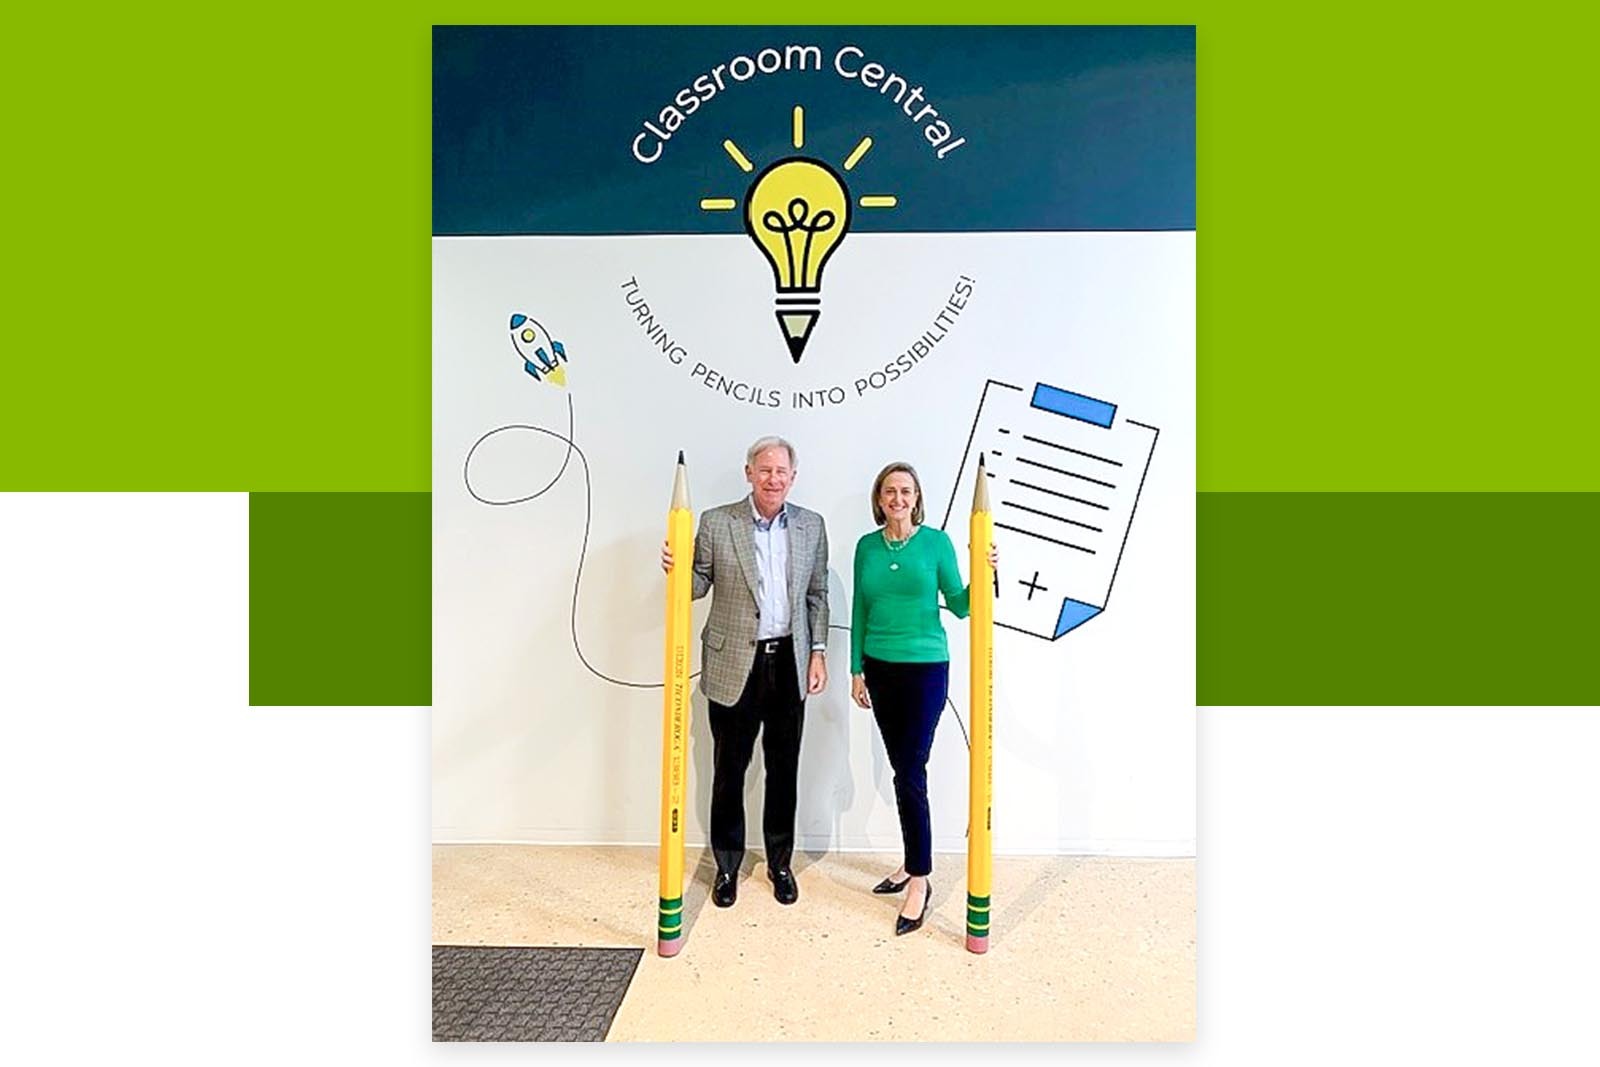 Two teachers standing next to the wall with Classroom Central...